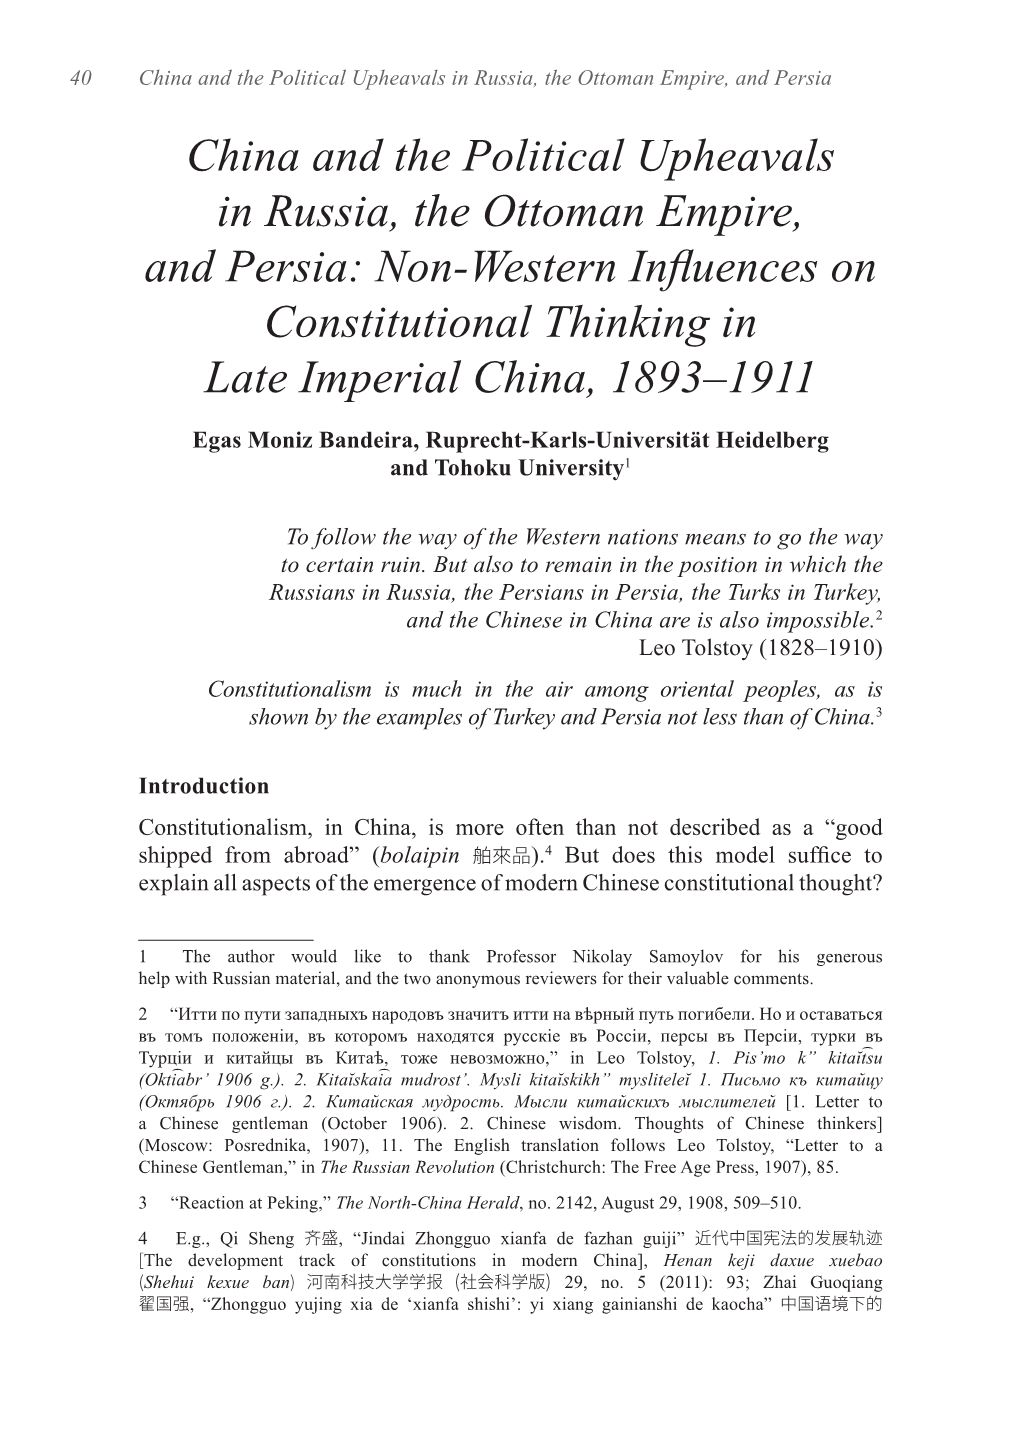 China and the Political Upheavals in Russia, the Ottoman Empire, and Persia